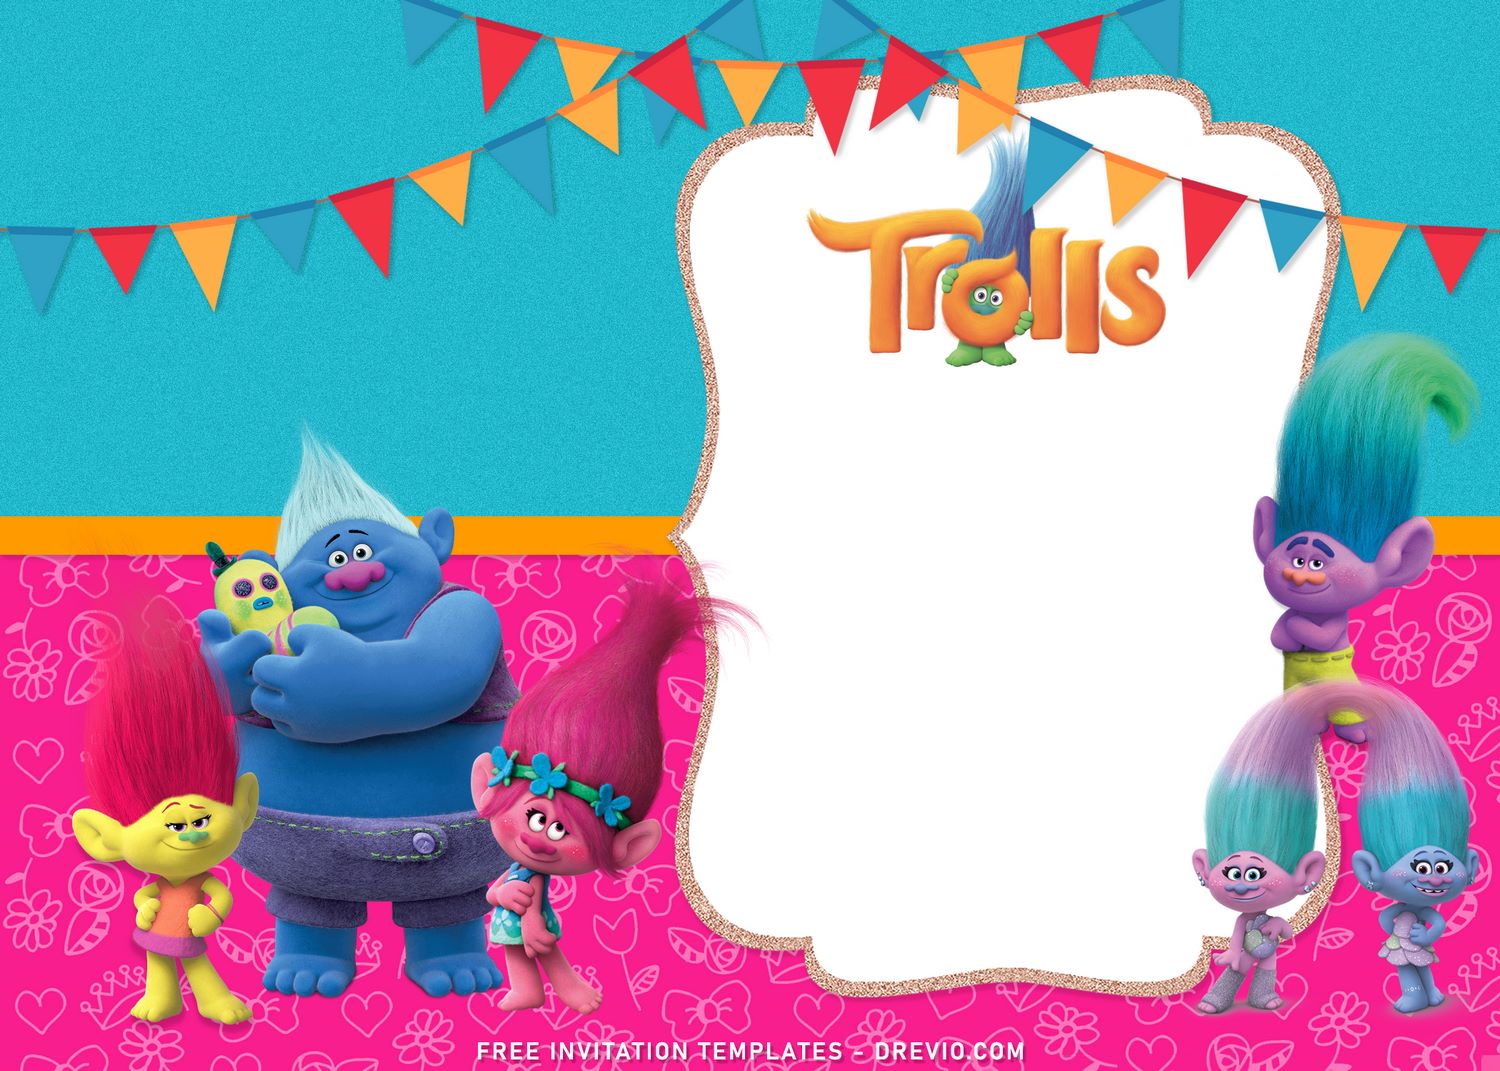 8+ Adorable Trolls Birthday Invitation Templates For Your Kid’s